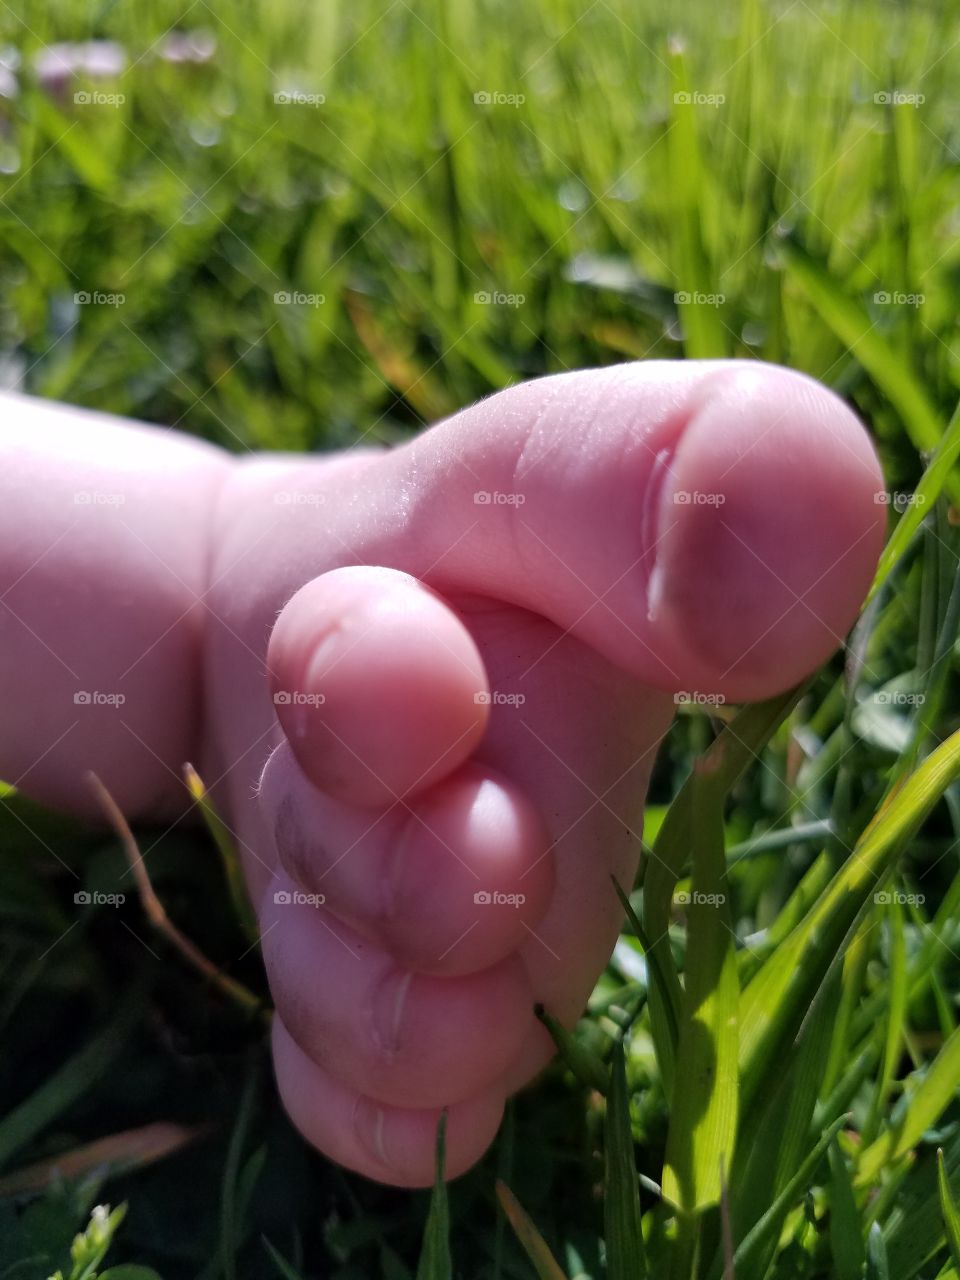 Sweet Sunny Toes